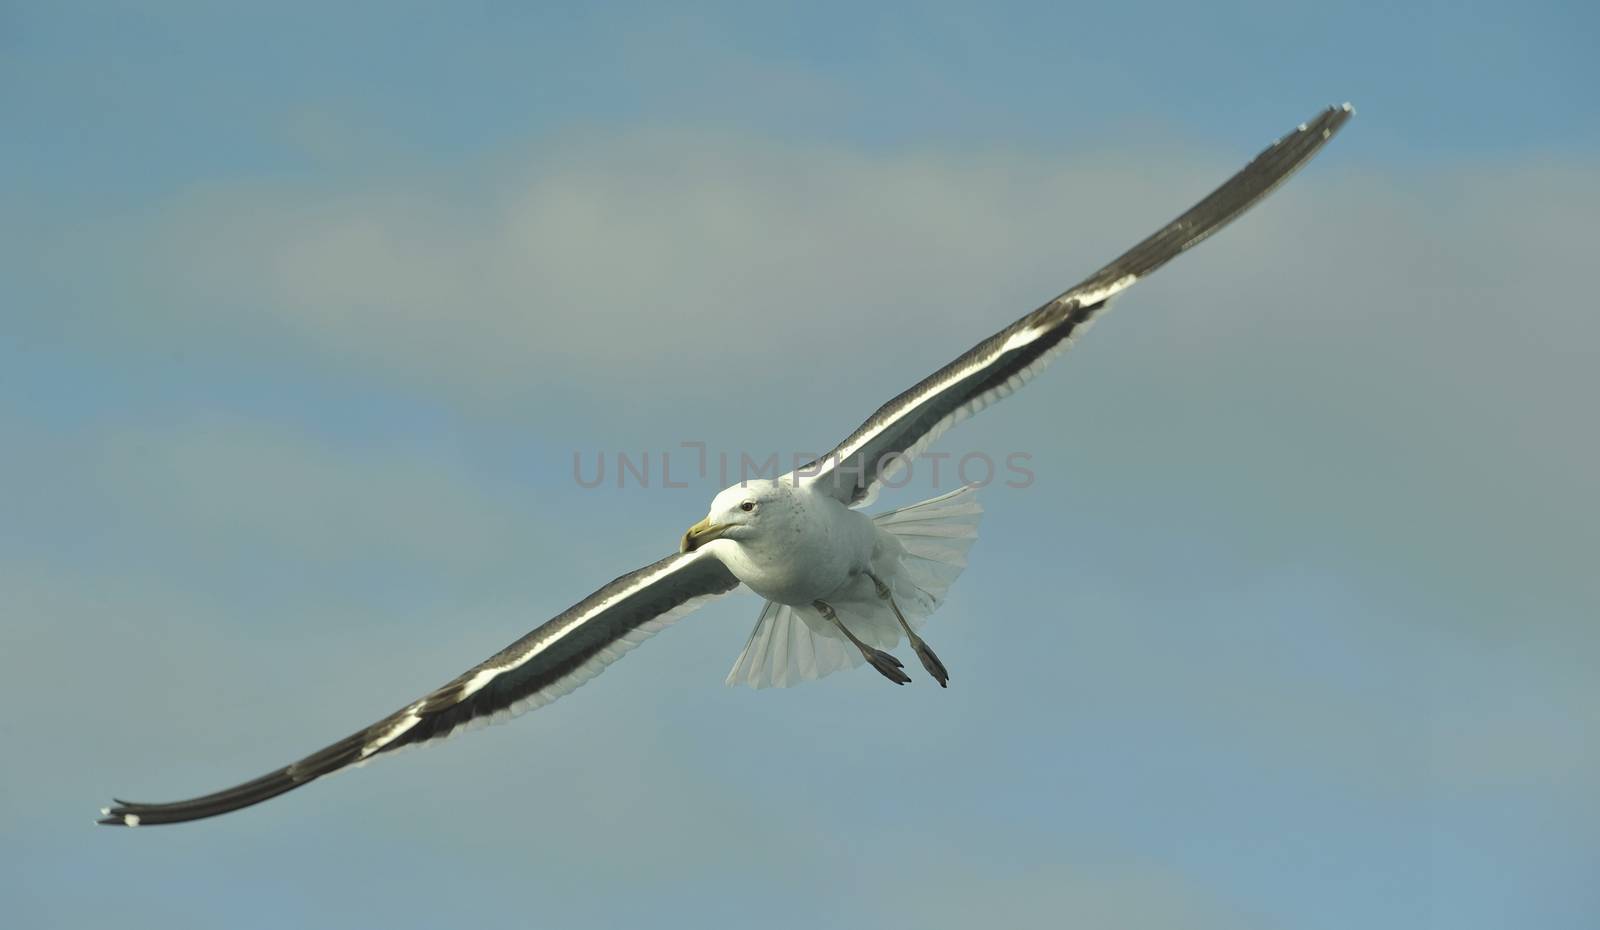 Flying kelp gull (Larus dominicanus), also known as the Dominican gul and Black Backed Kelp Gull. False Bay, South Africa